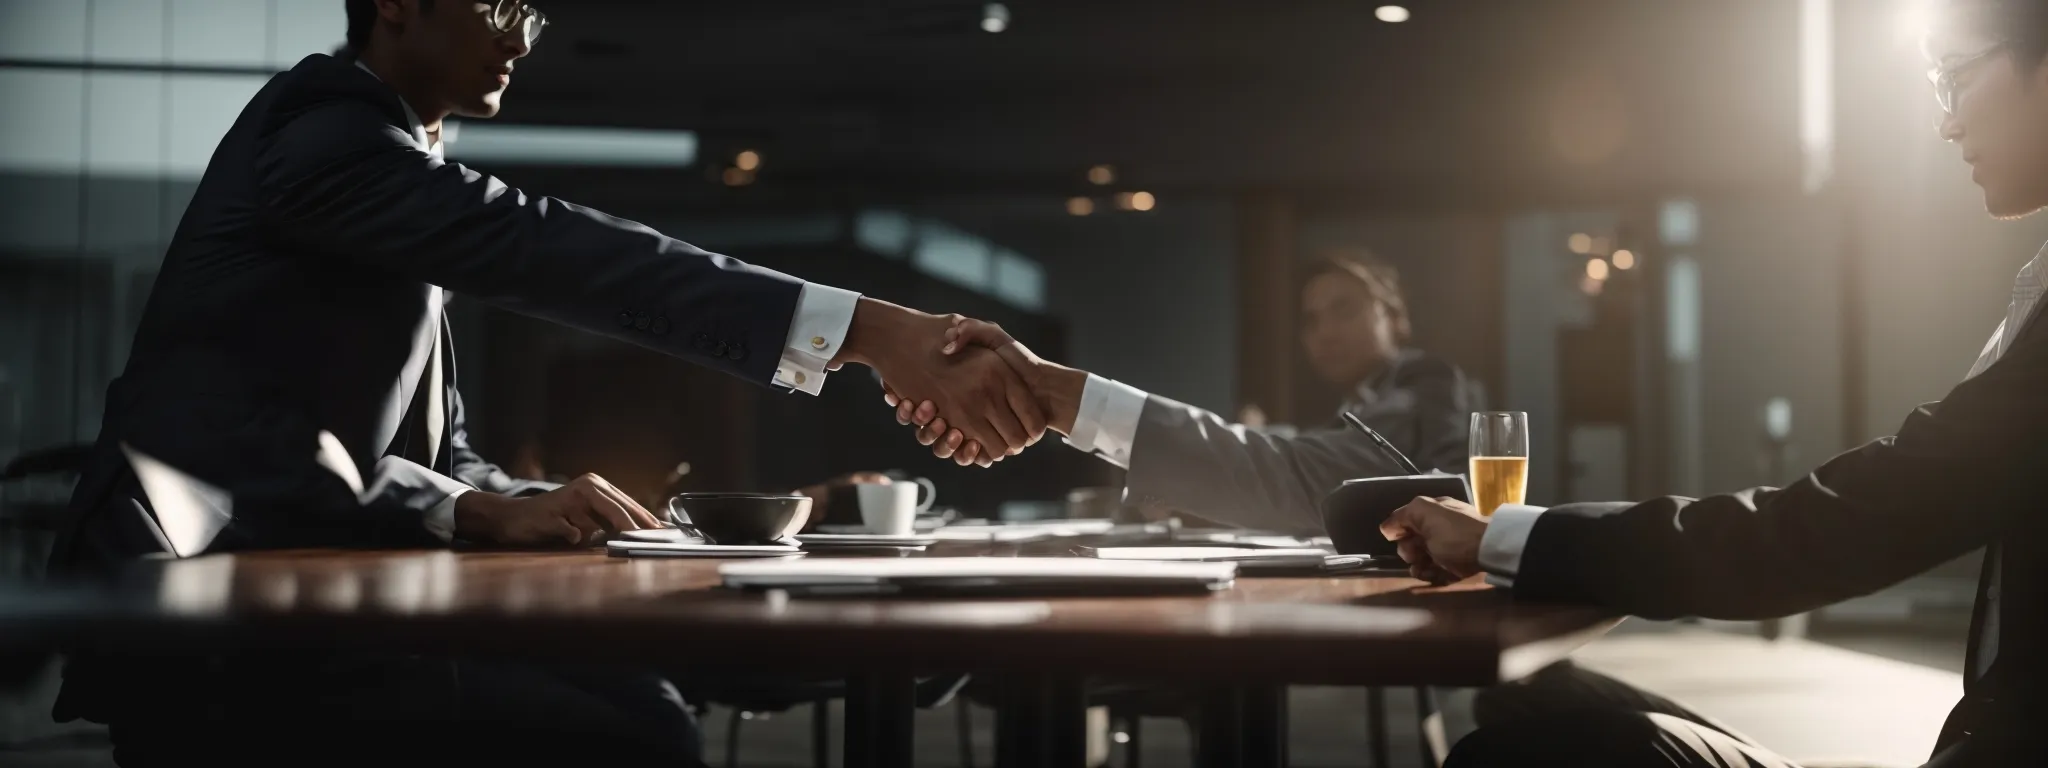 business partners shaking hands in agreement over a digital marketing strategy session, with a bright glow on the table symbolizing innovation and partnership.